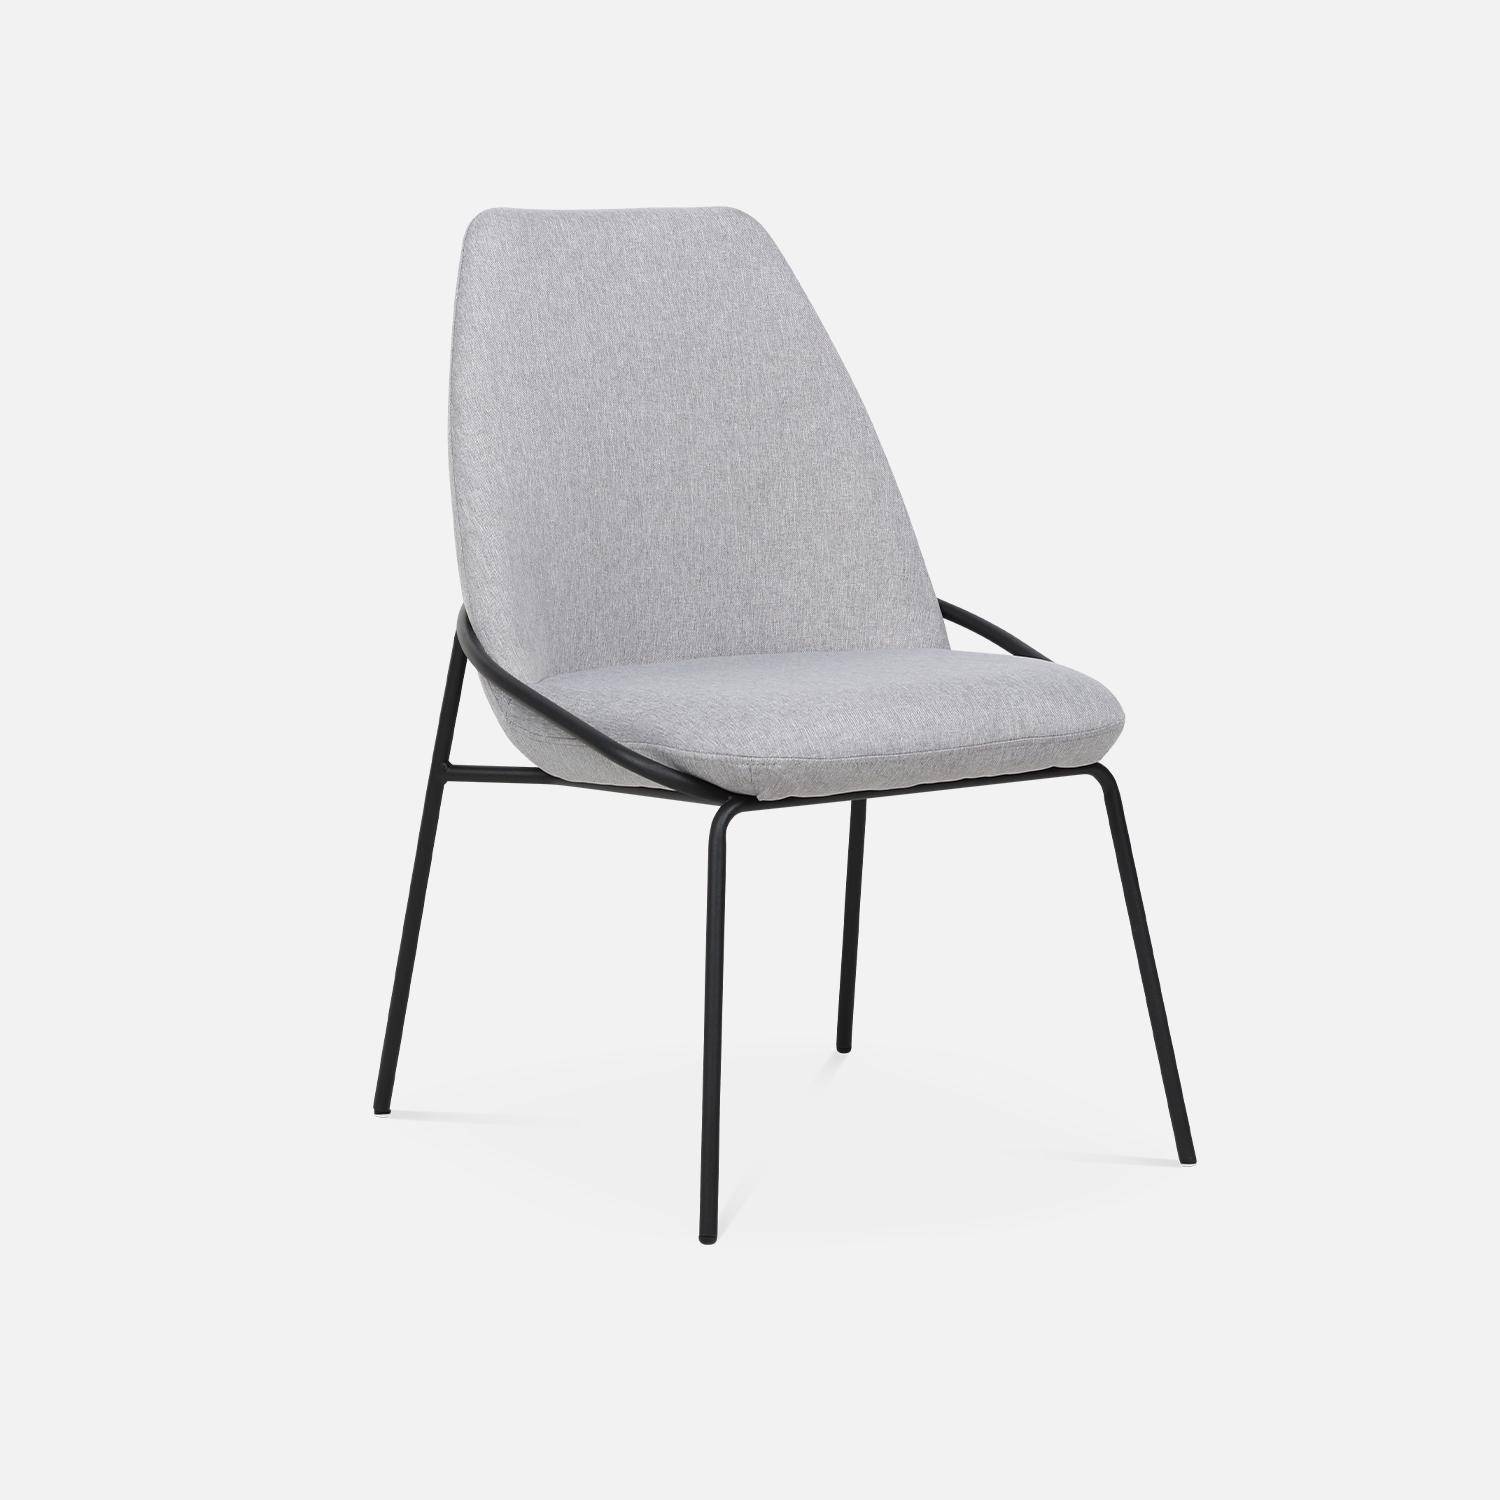 Retro-style metal and upholstered chair, 56.5x63x82.5cm, Lisbet, Light Grey,sweeek,Photo3